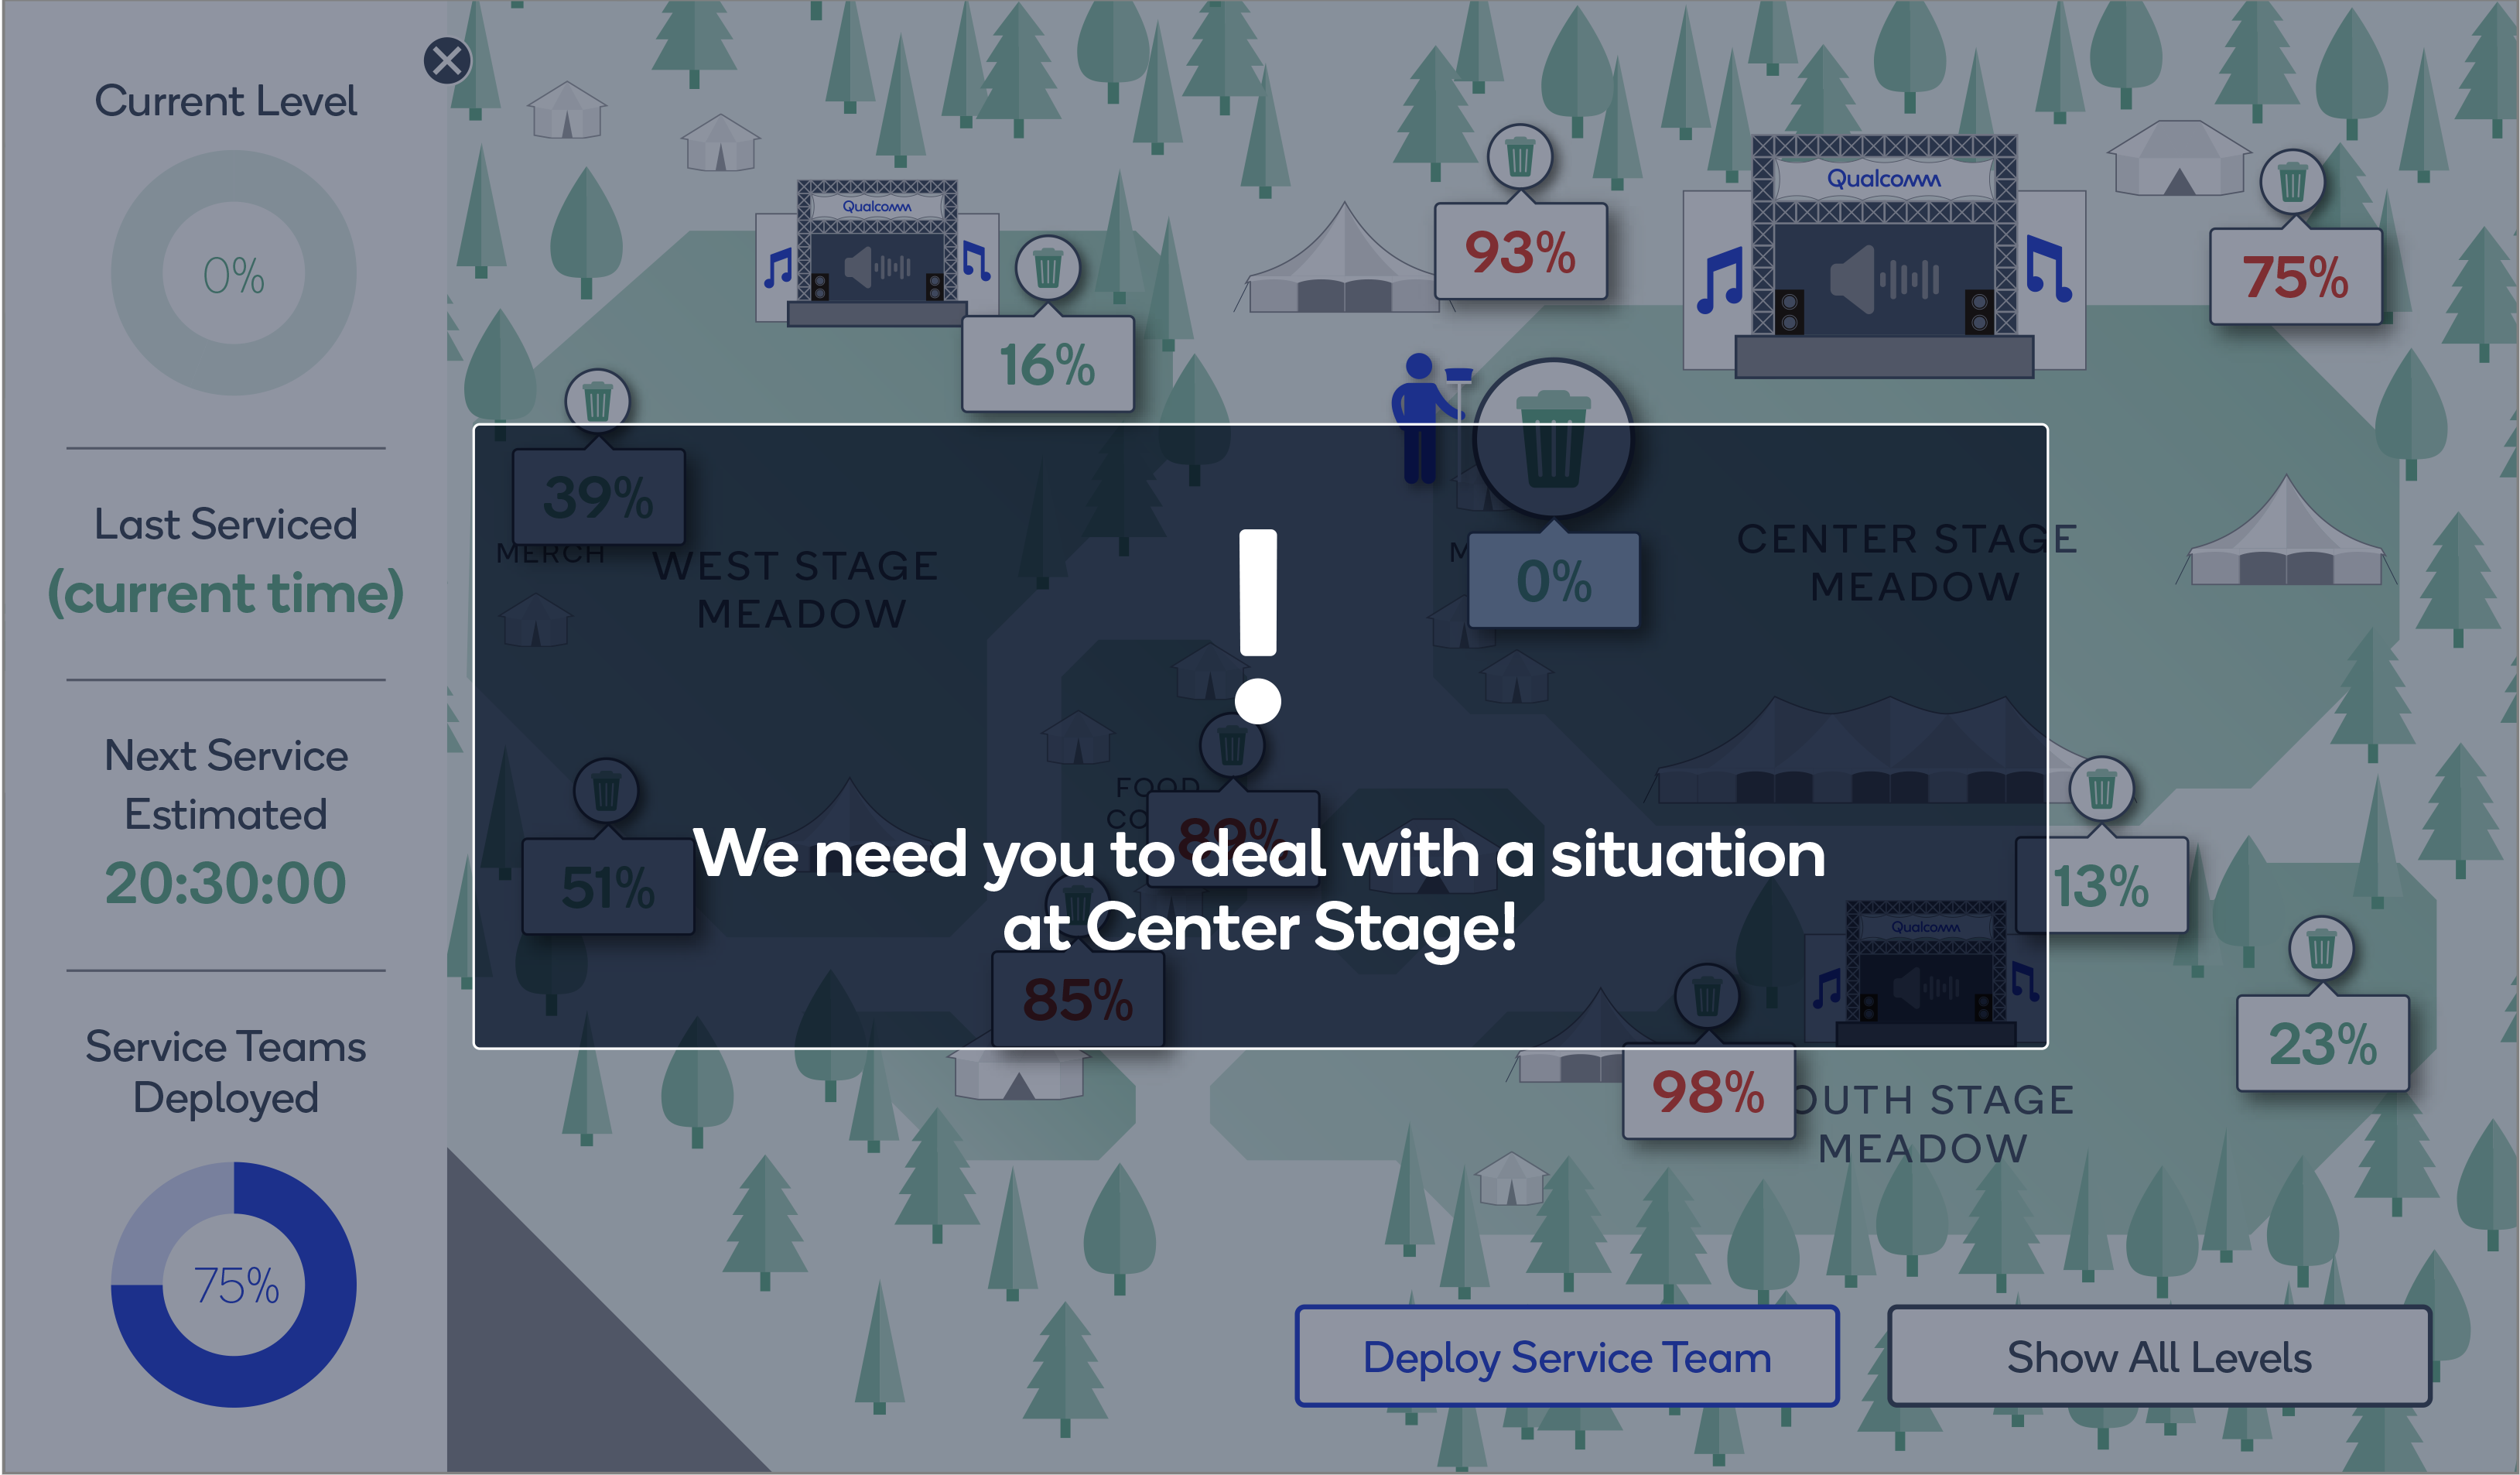 Alert to help with a situation at Center Stage.